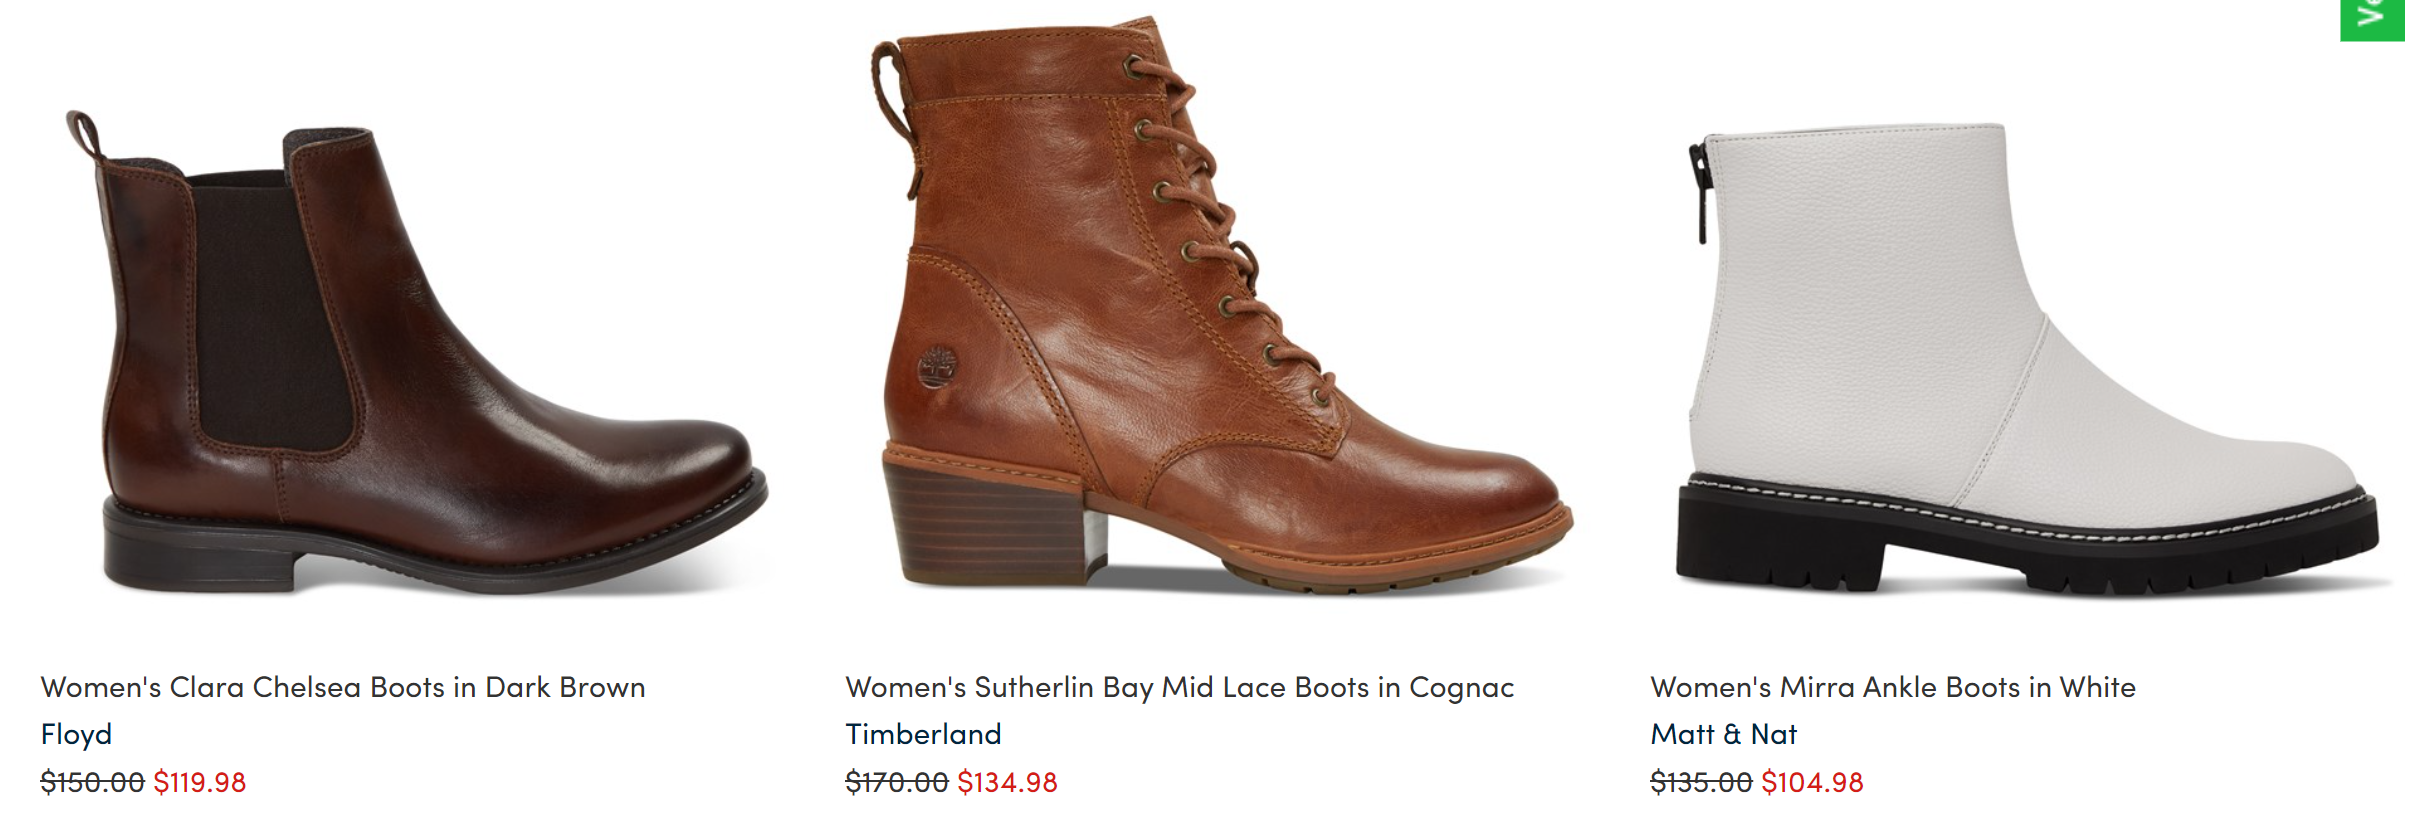 little-burgundy-winter-boots-as-low-as-48-percent-off-120-for-timberland-2020-11-10